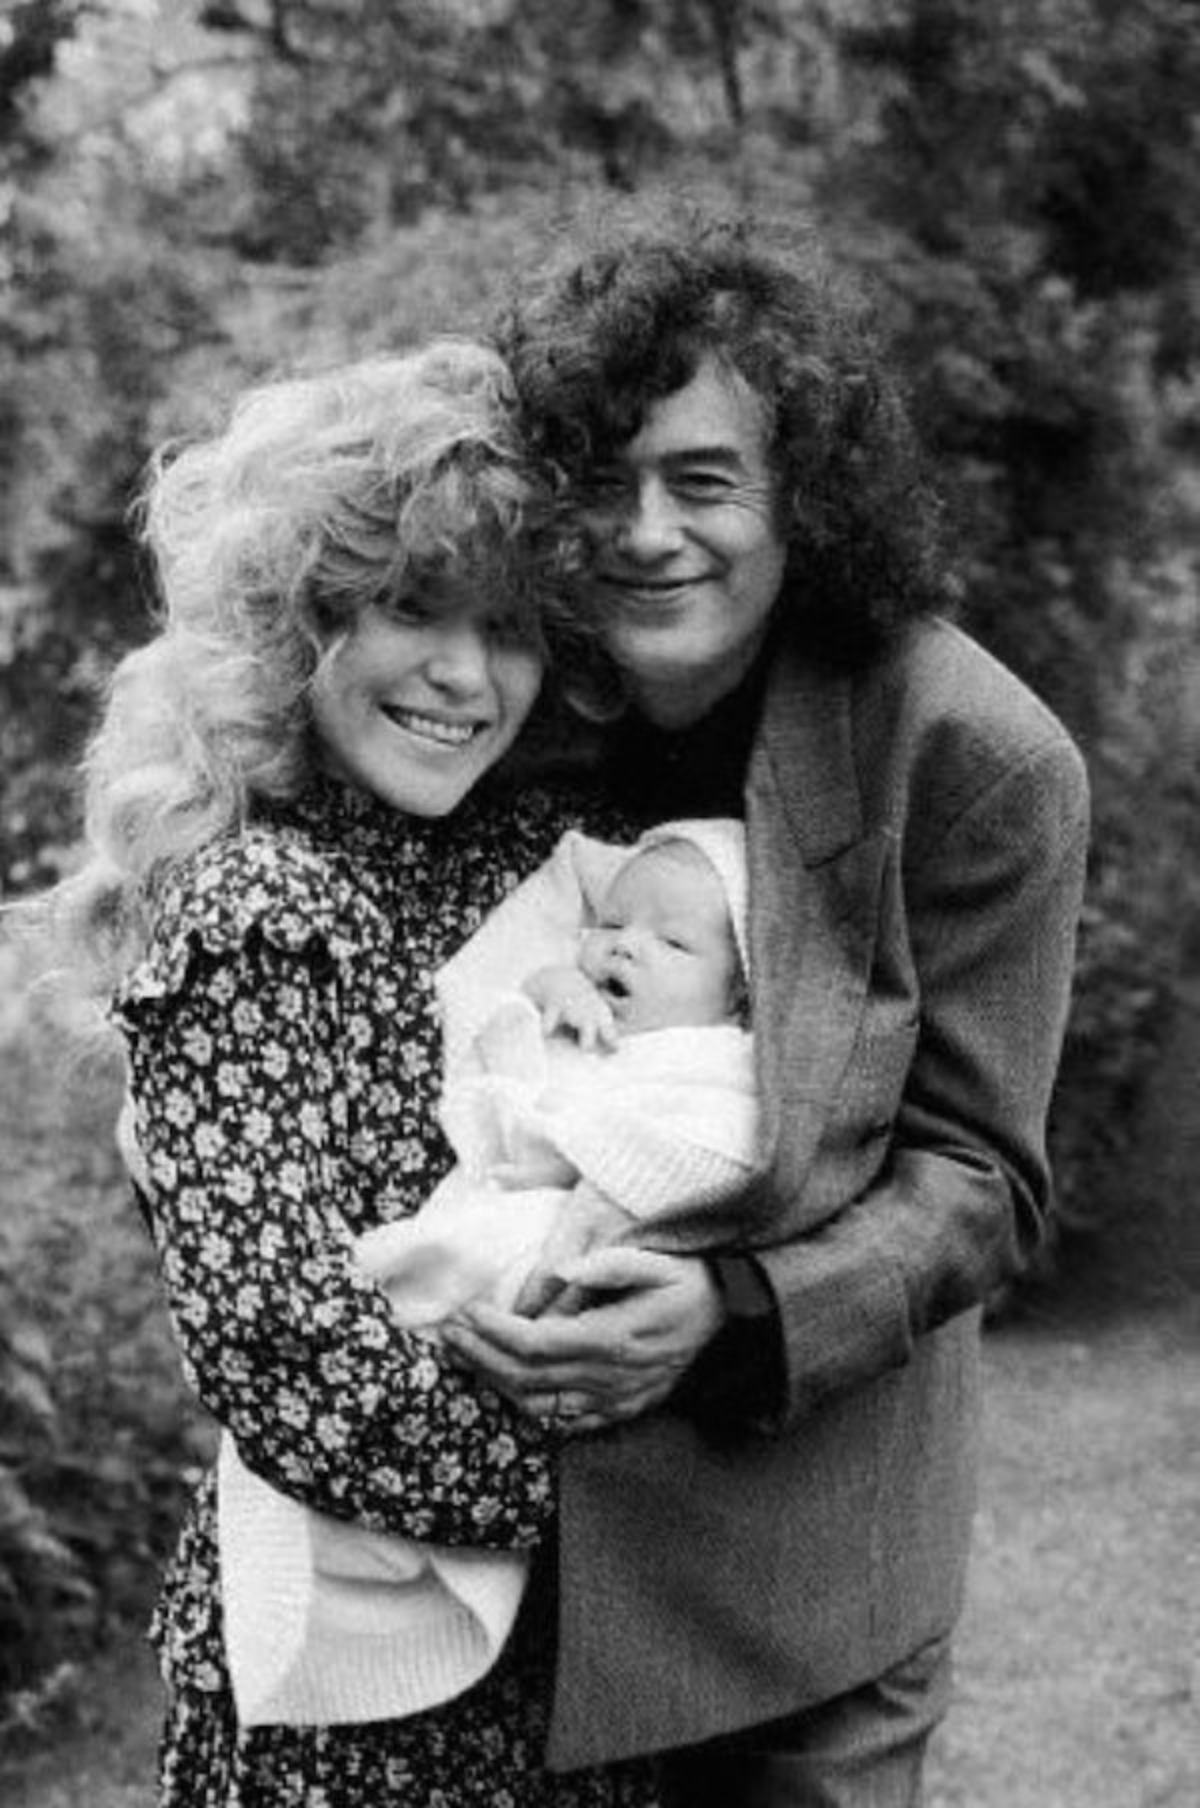 Jimmy Page and Patricia Acker